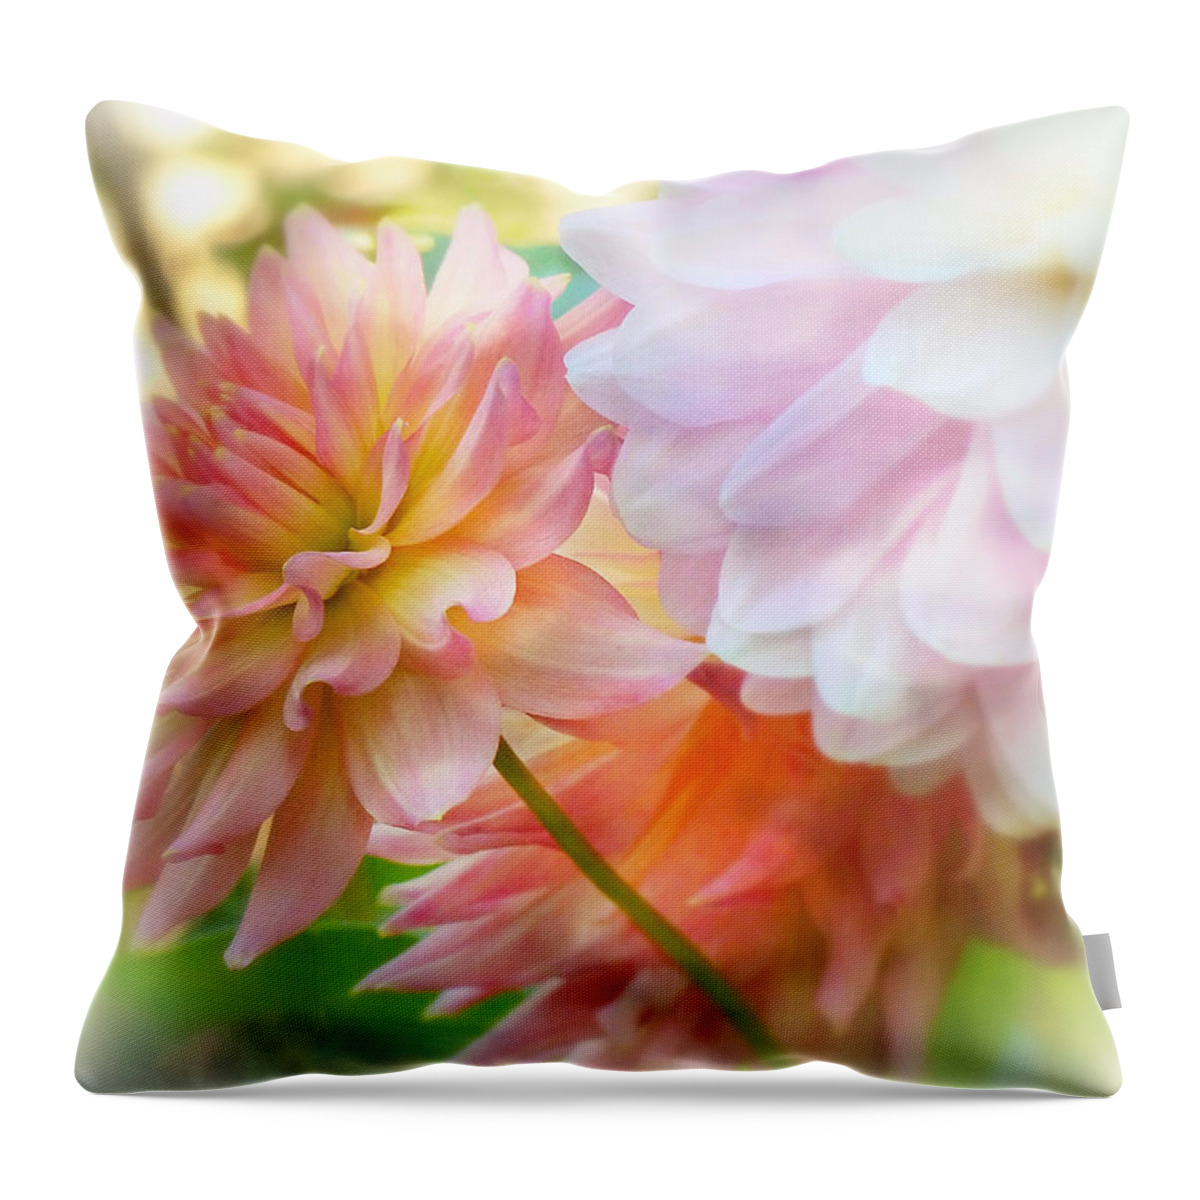 Feminine Throw Pillow featuring the photograph Art Of The Feminine by Connie Handscomb